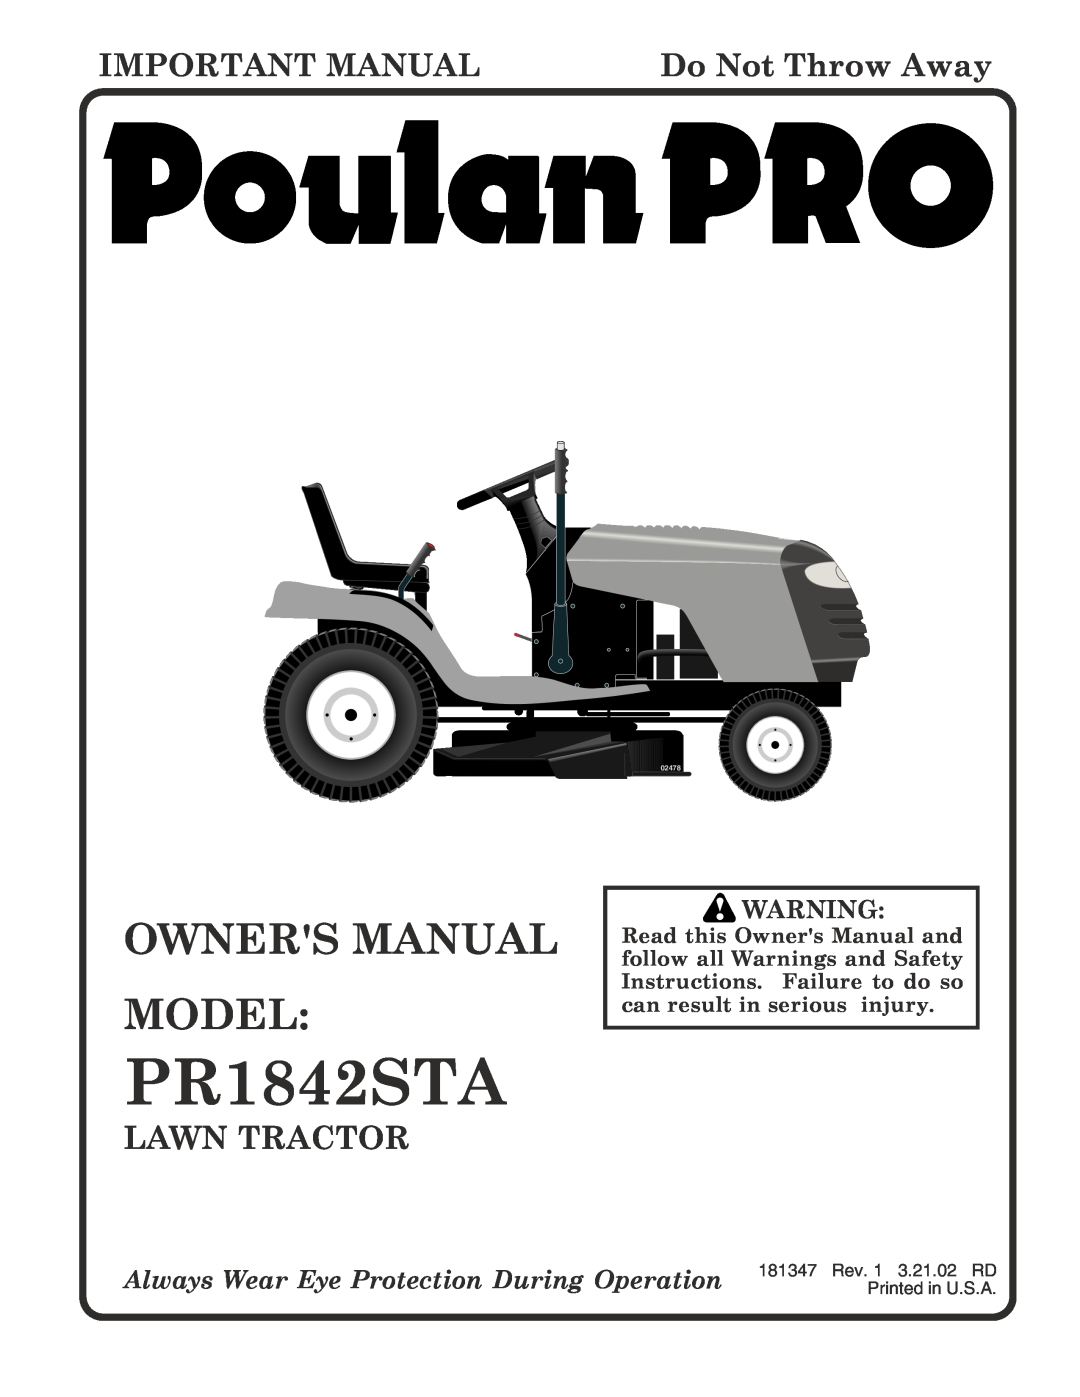 Poulan 181347 owner manual PR1842STA, Owners Manual Model, Important Manual, Do Not Throw Away, Lawn Tractor, 02478 